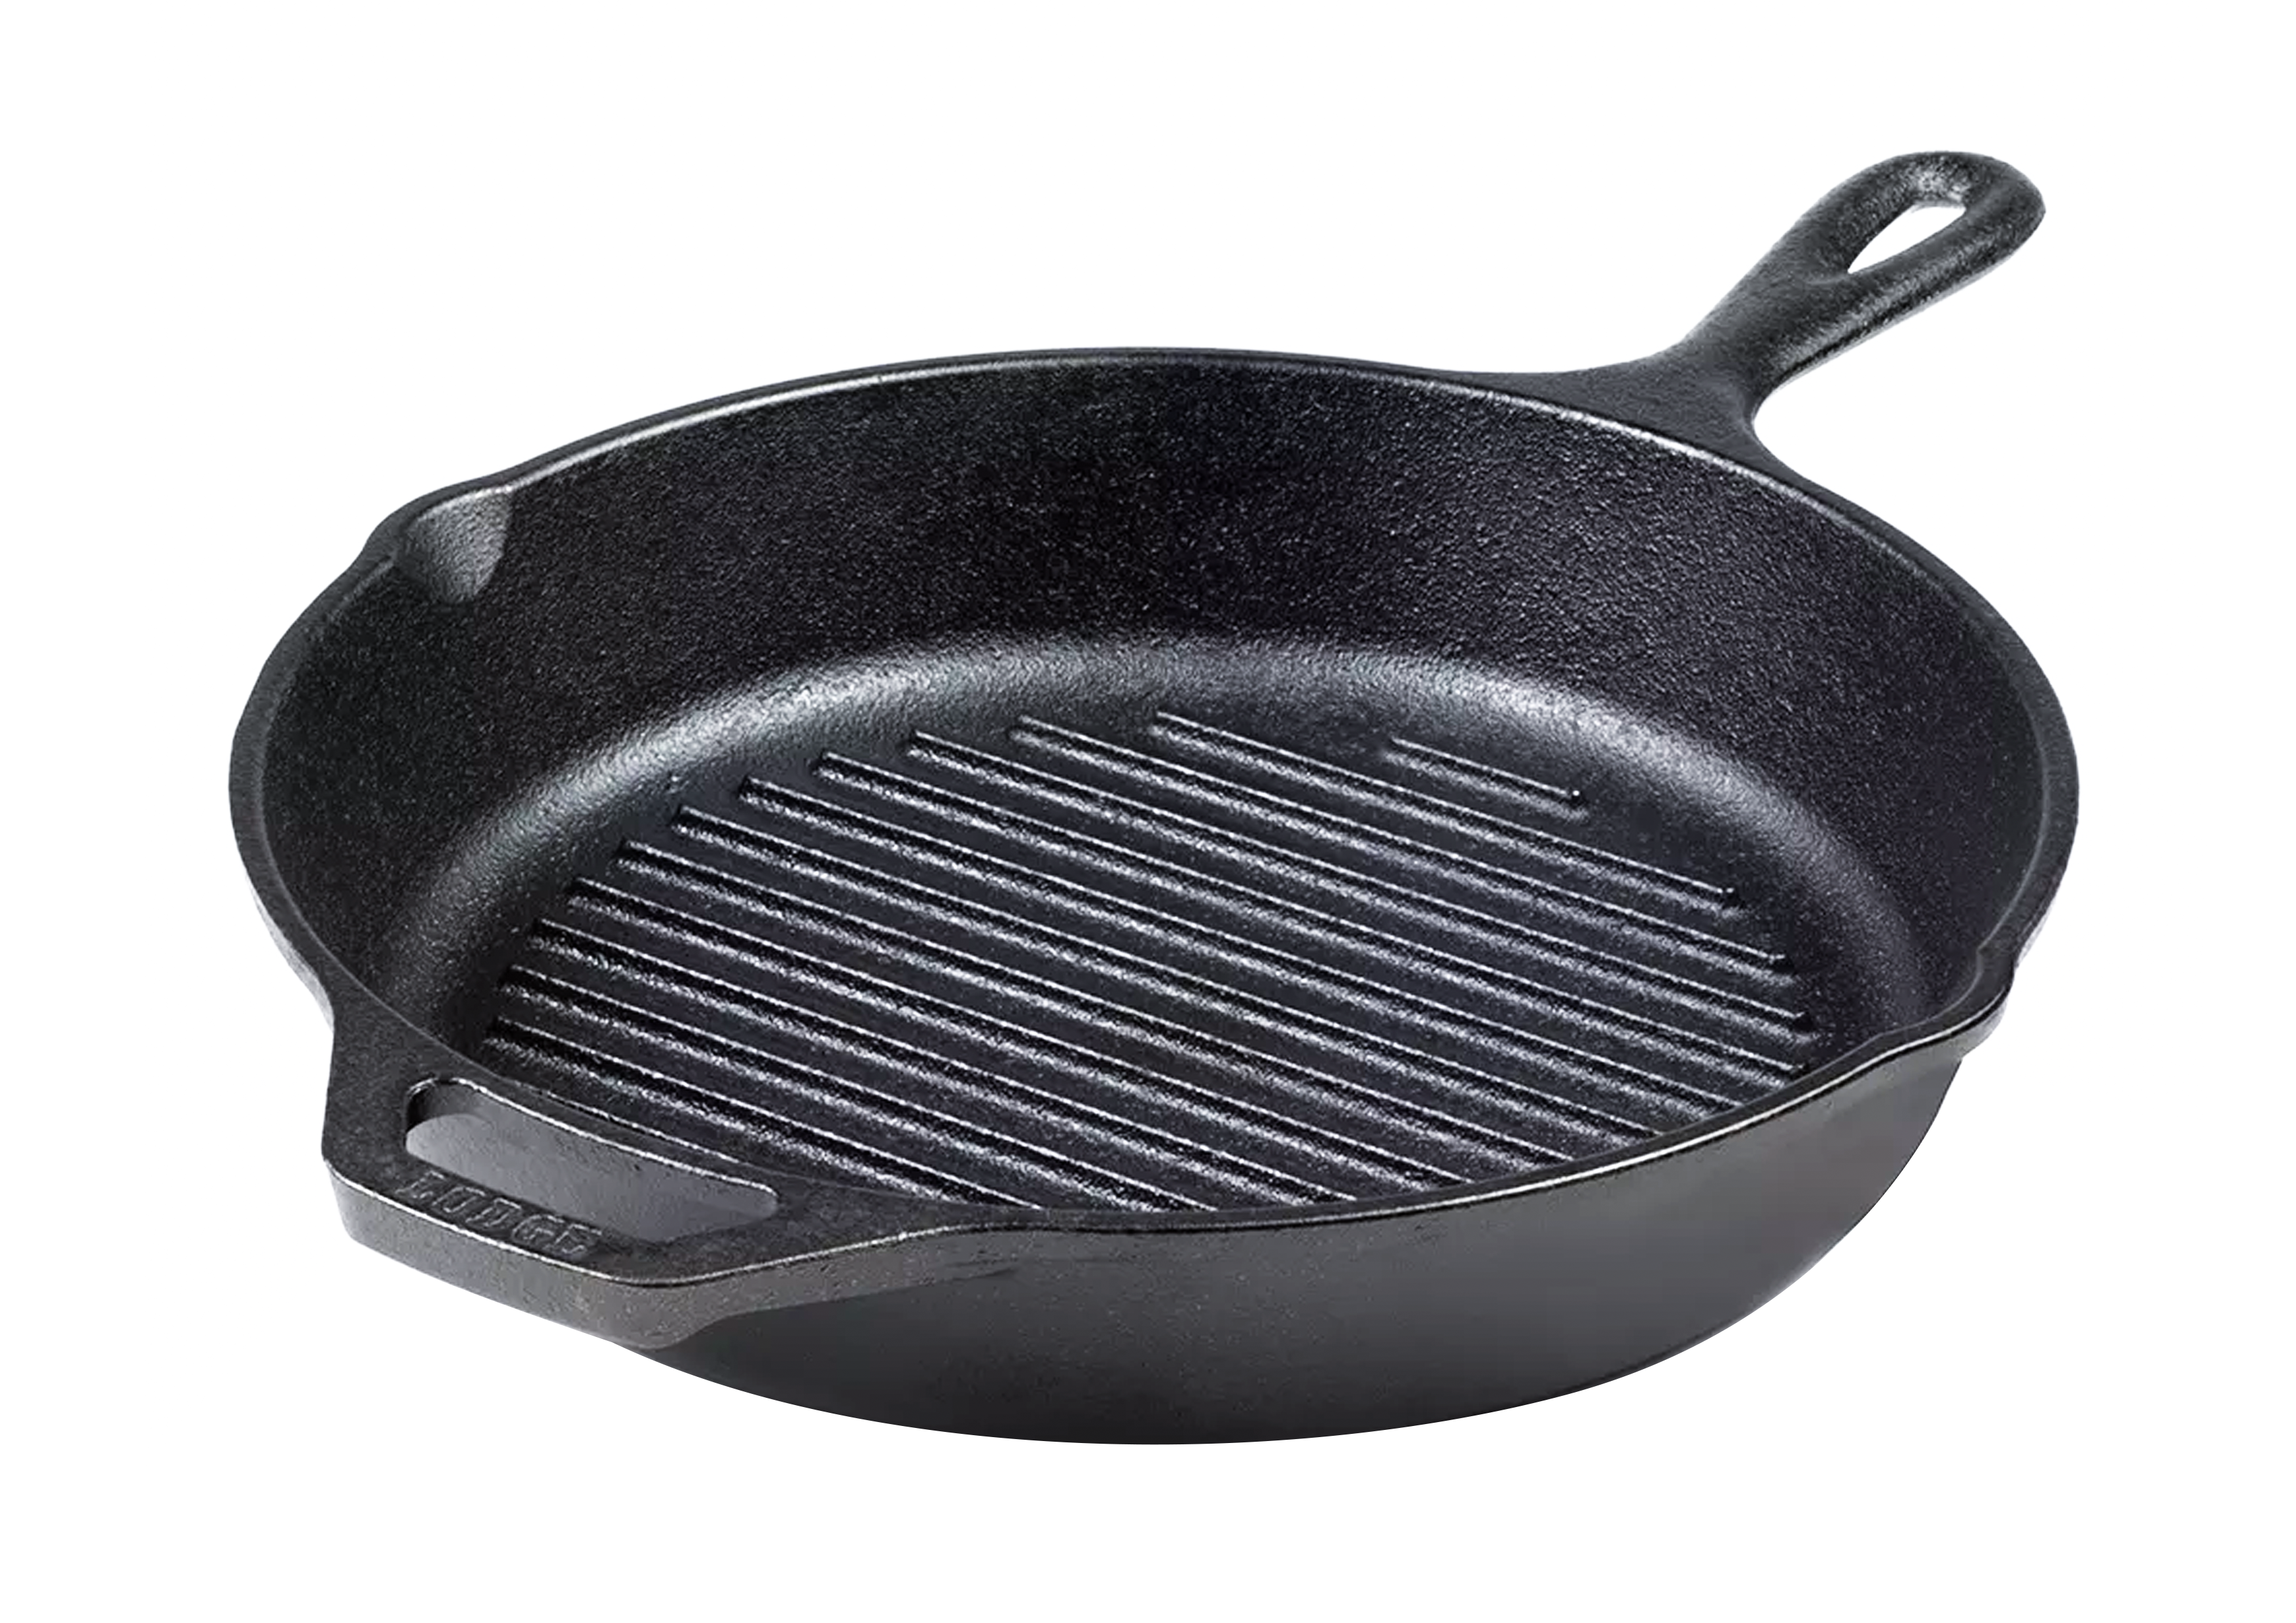 Can You Use Cast Iron on a Glass Cooktop?